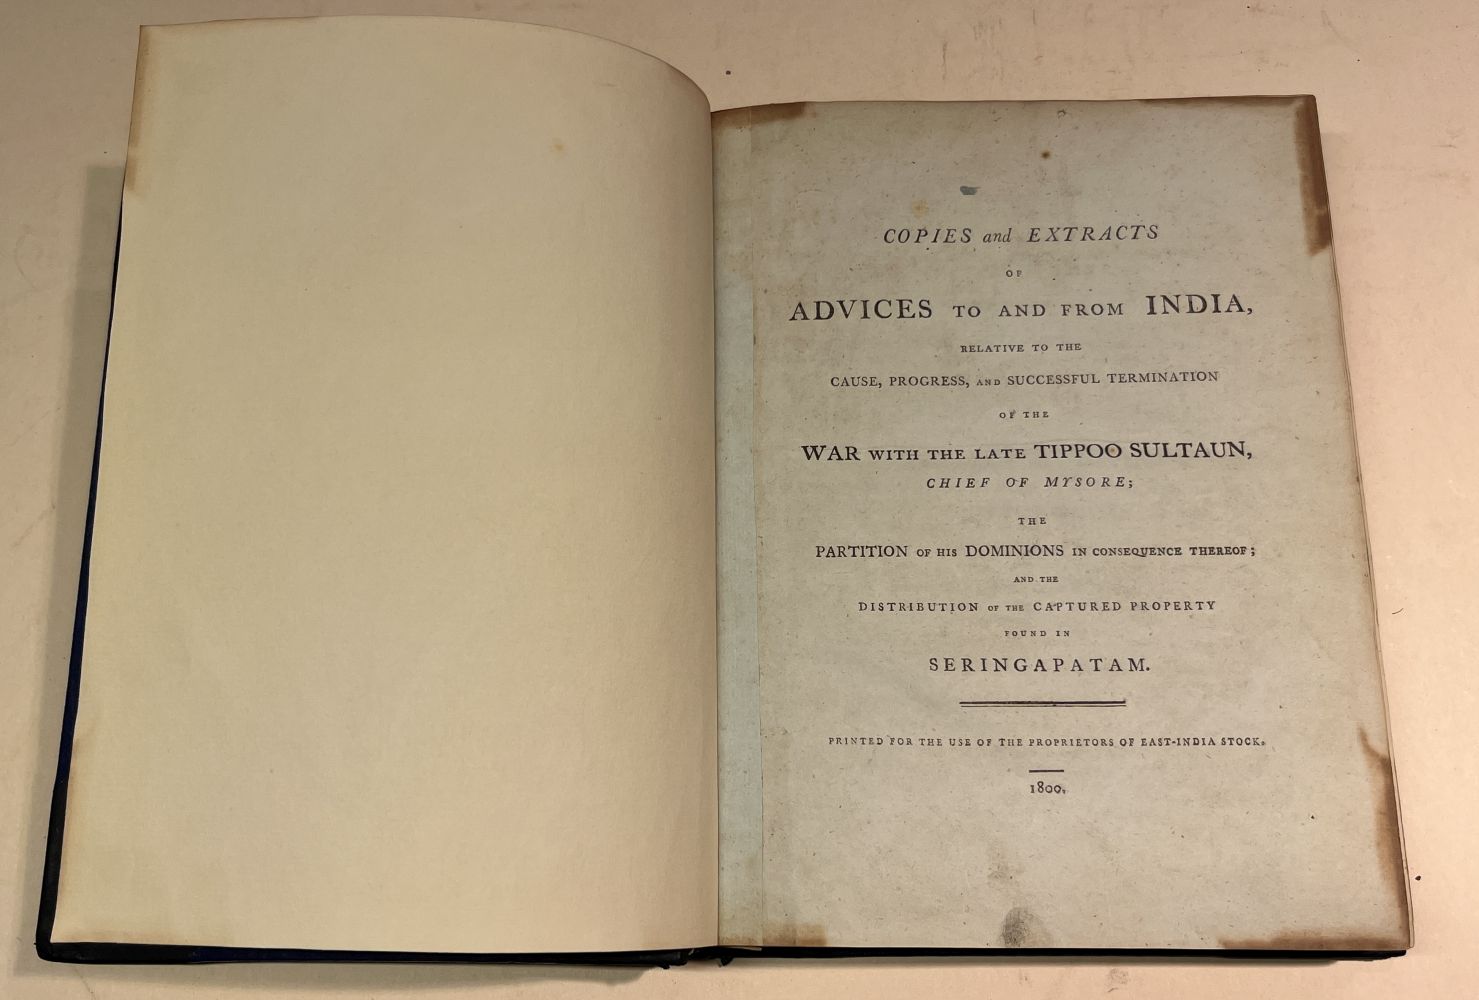 East India Company. Copies and Extracts of Advises to and from India..., 1799-1800 - Image 5 of 8